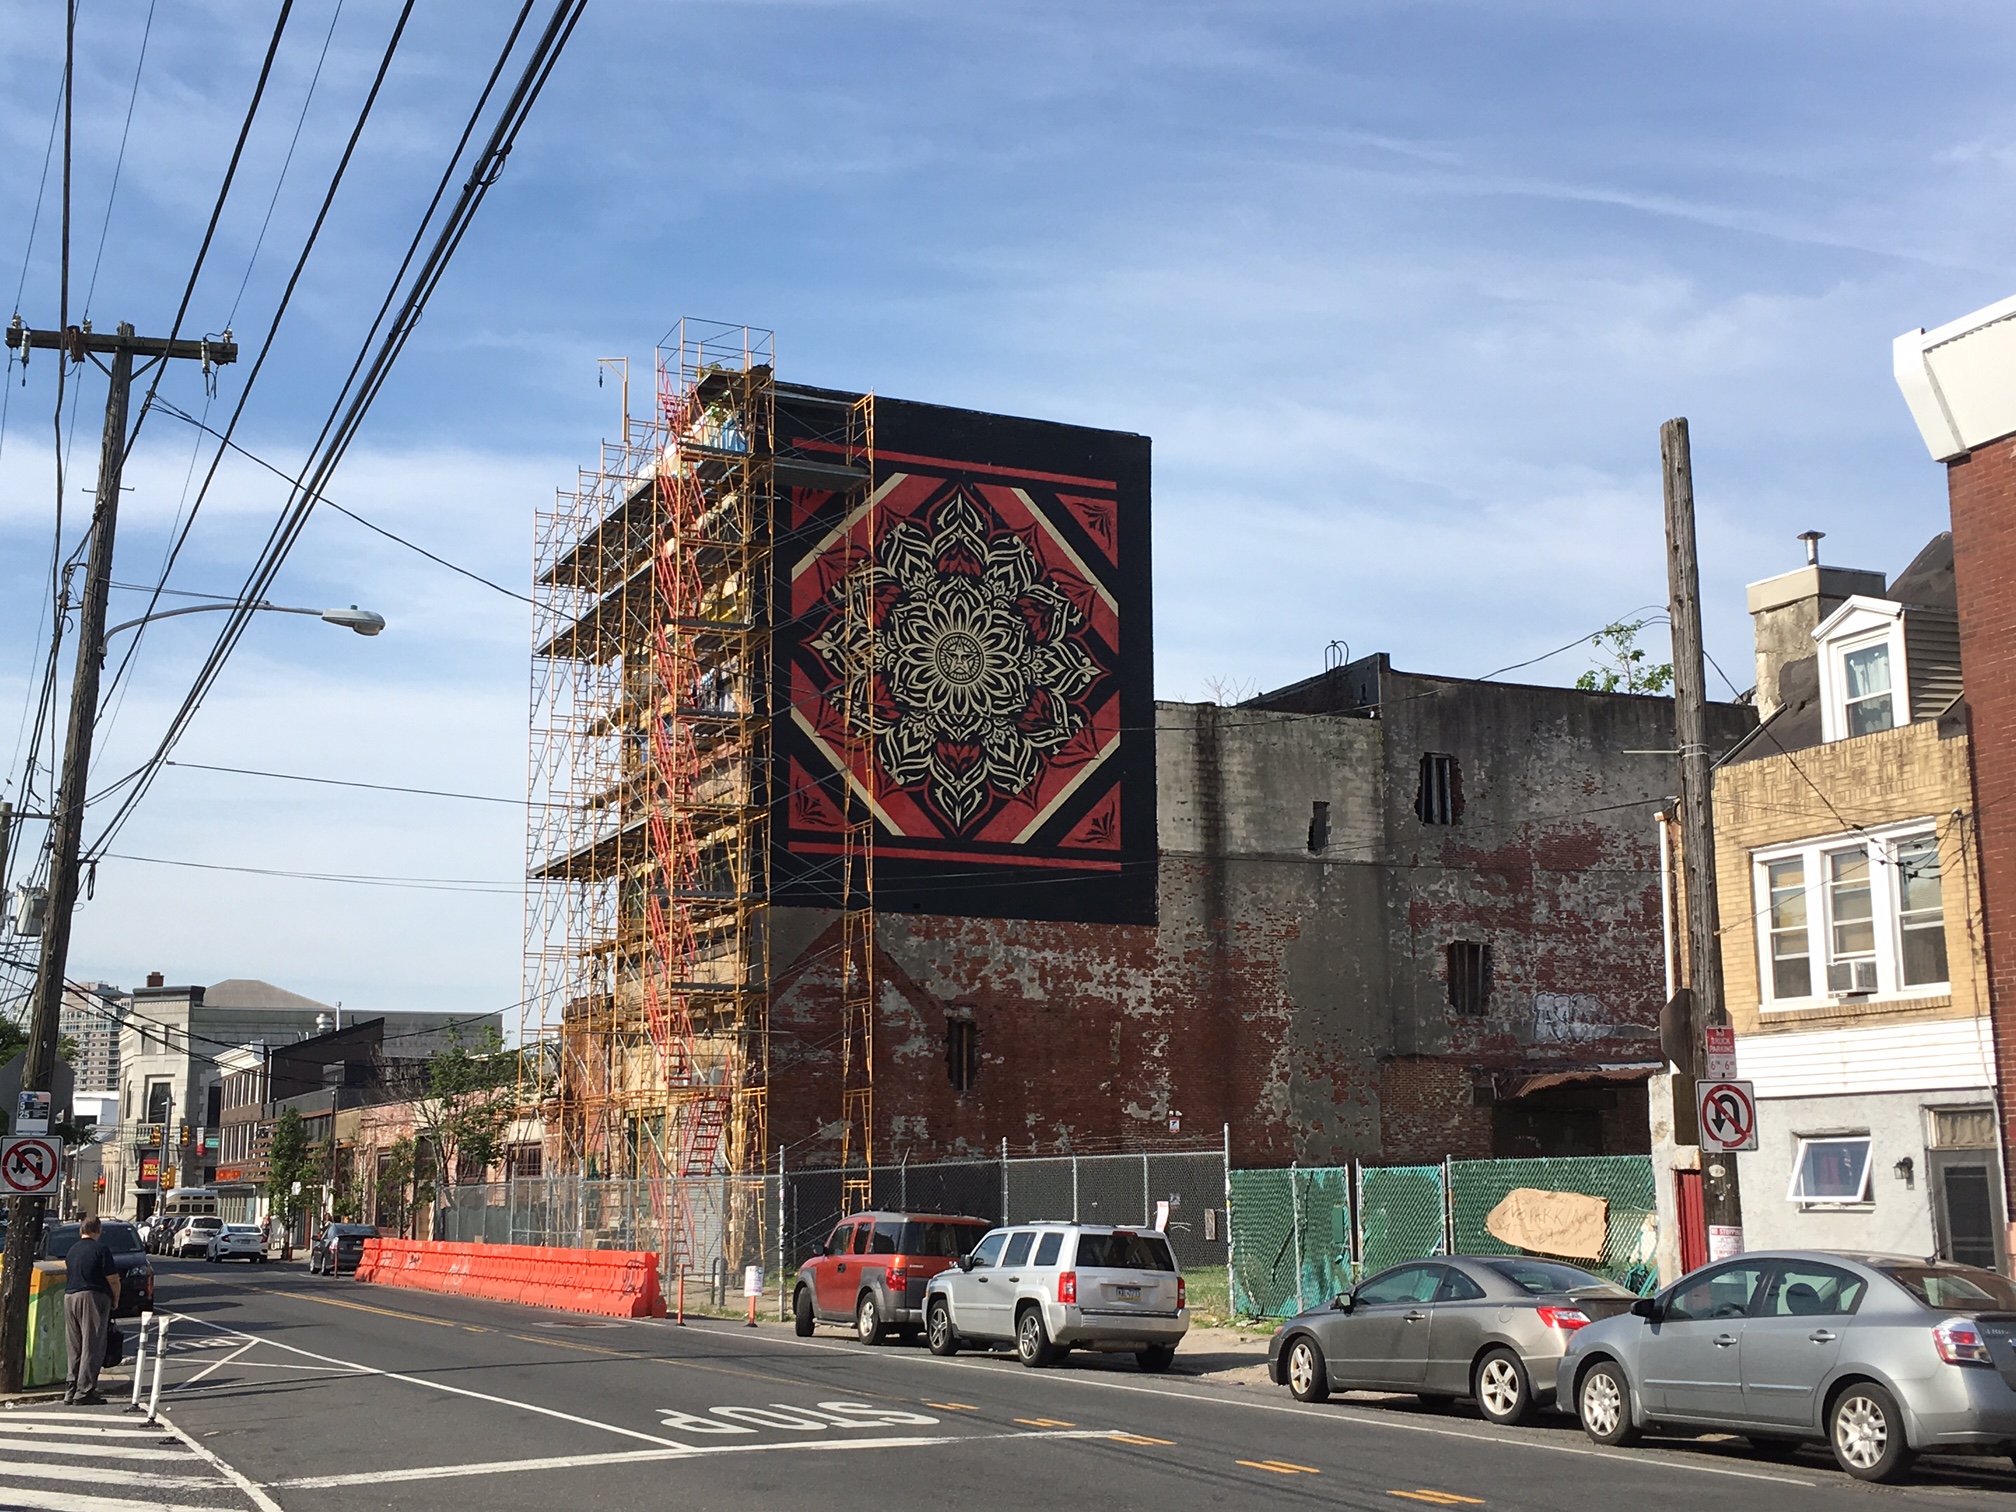 Scaffolding surrounds the proposed site of a Fishtown hotel, next to Frankford Hall. The sidewalk has been blocked off for years. A Shepard Fairey mural is painted on the side of the building. 